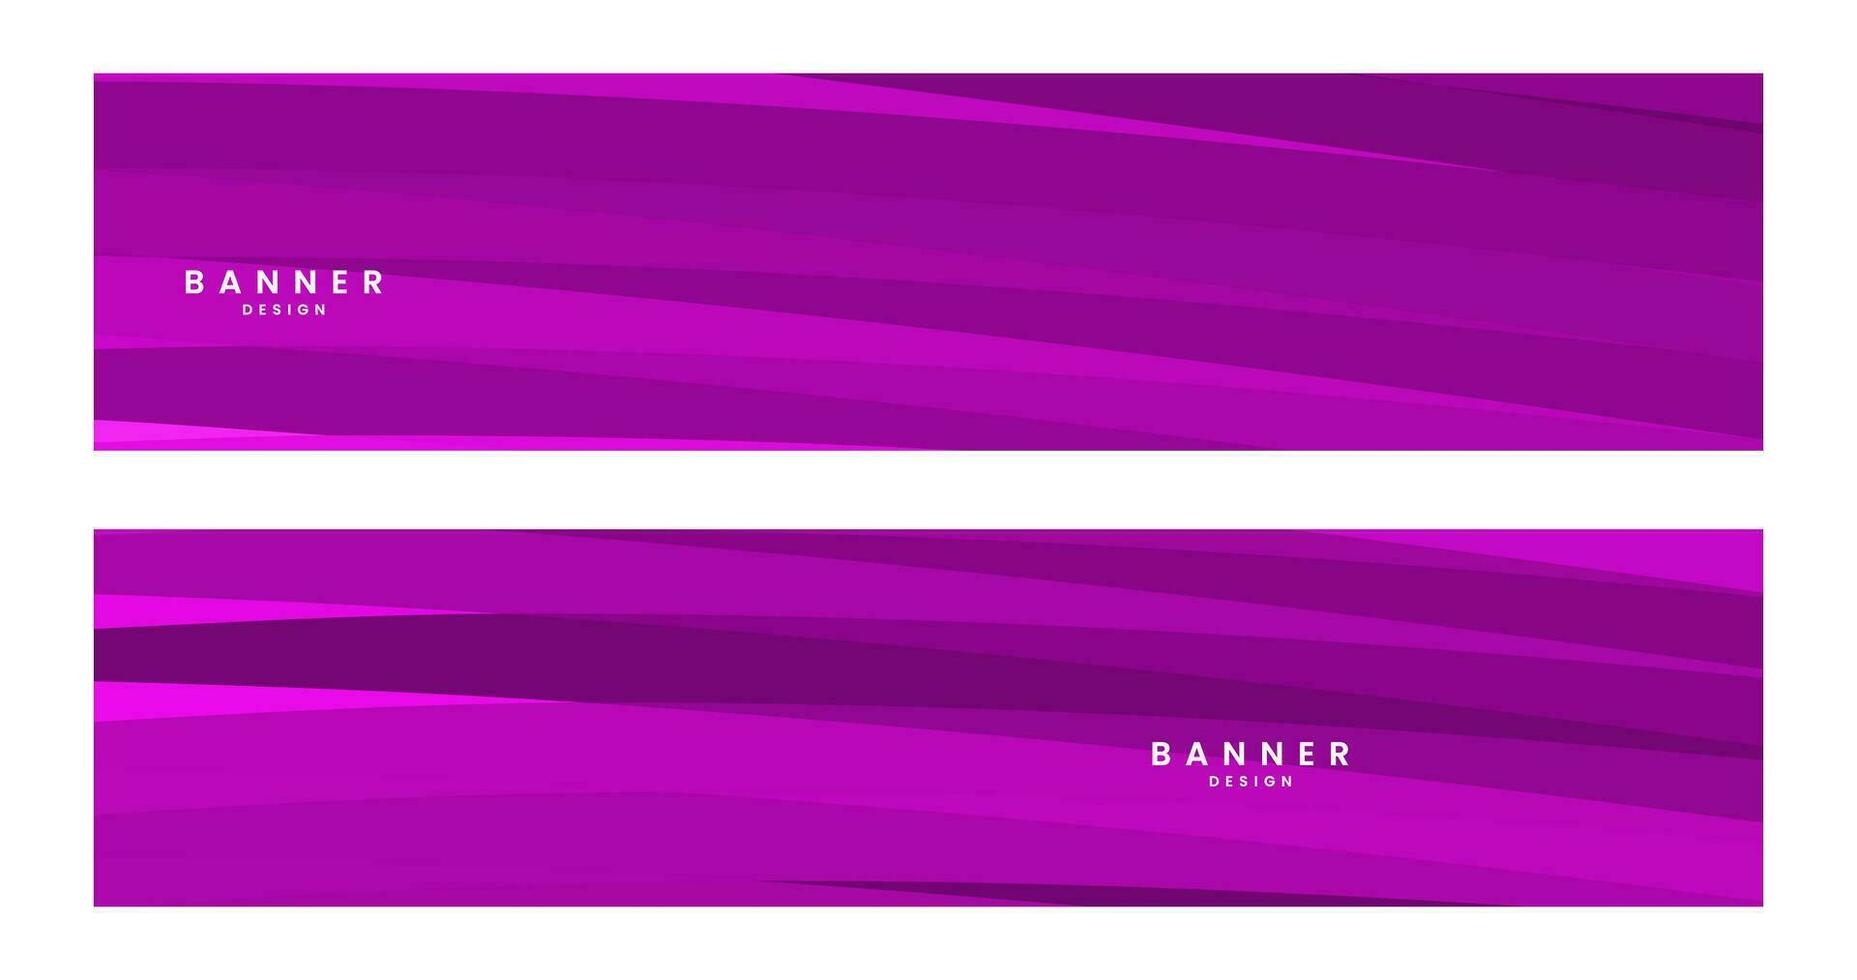 set of banners with abstract striped colorful background vector